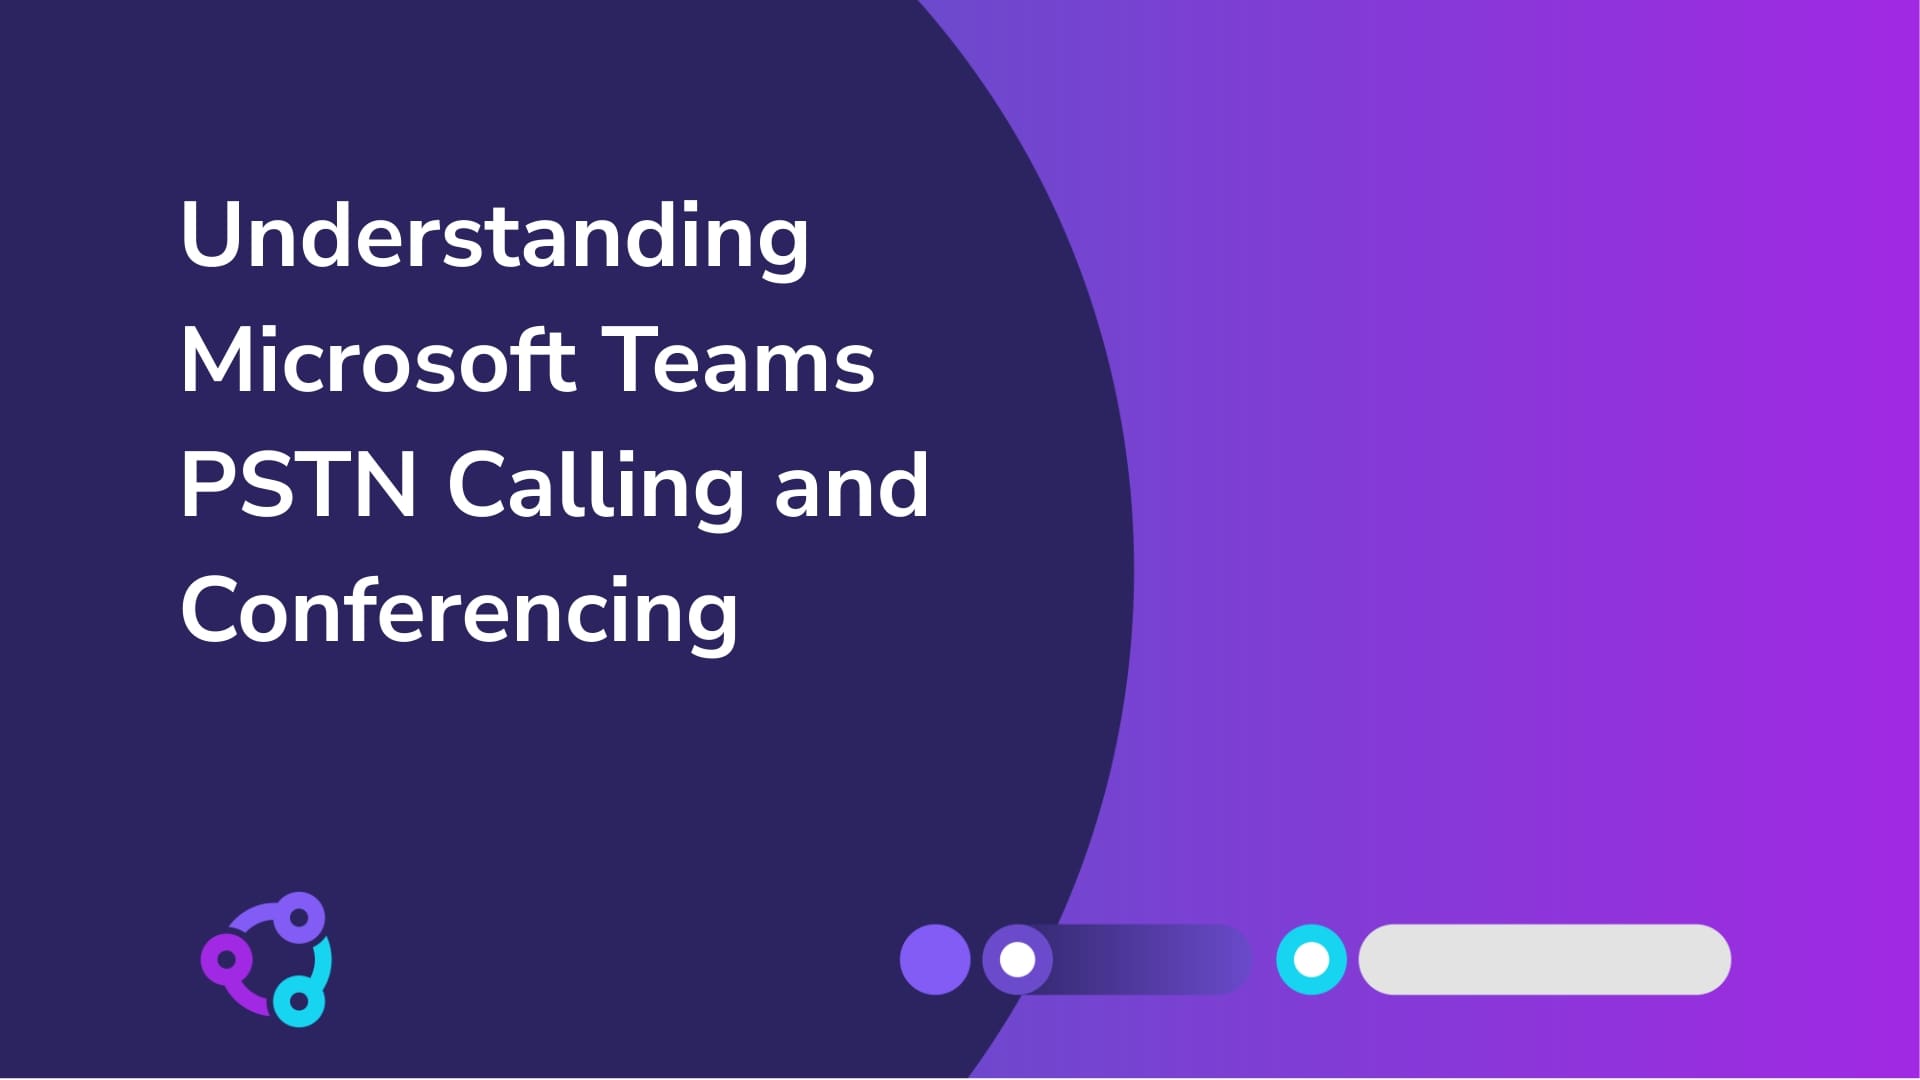 Microsoft Teams PSTN calling and conferencing